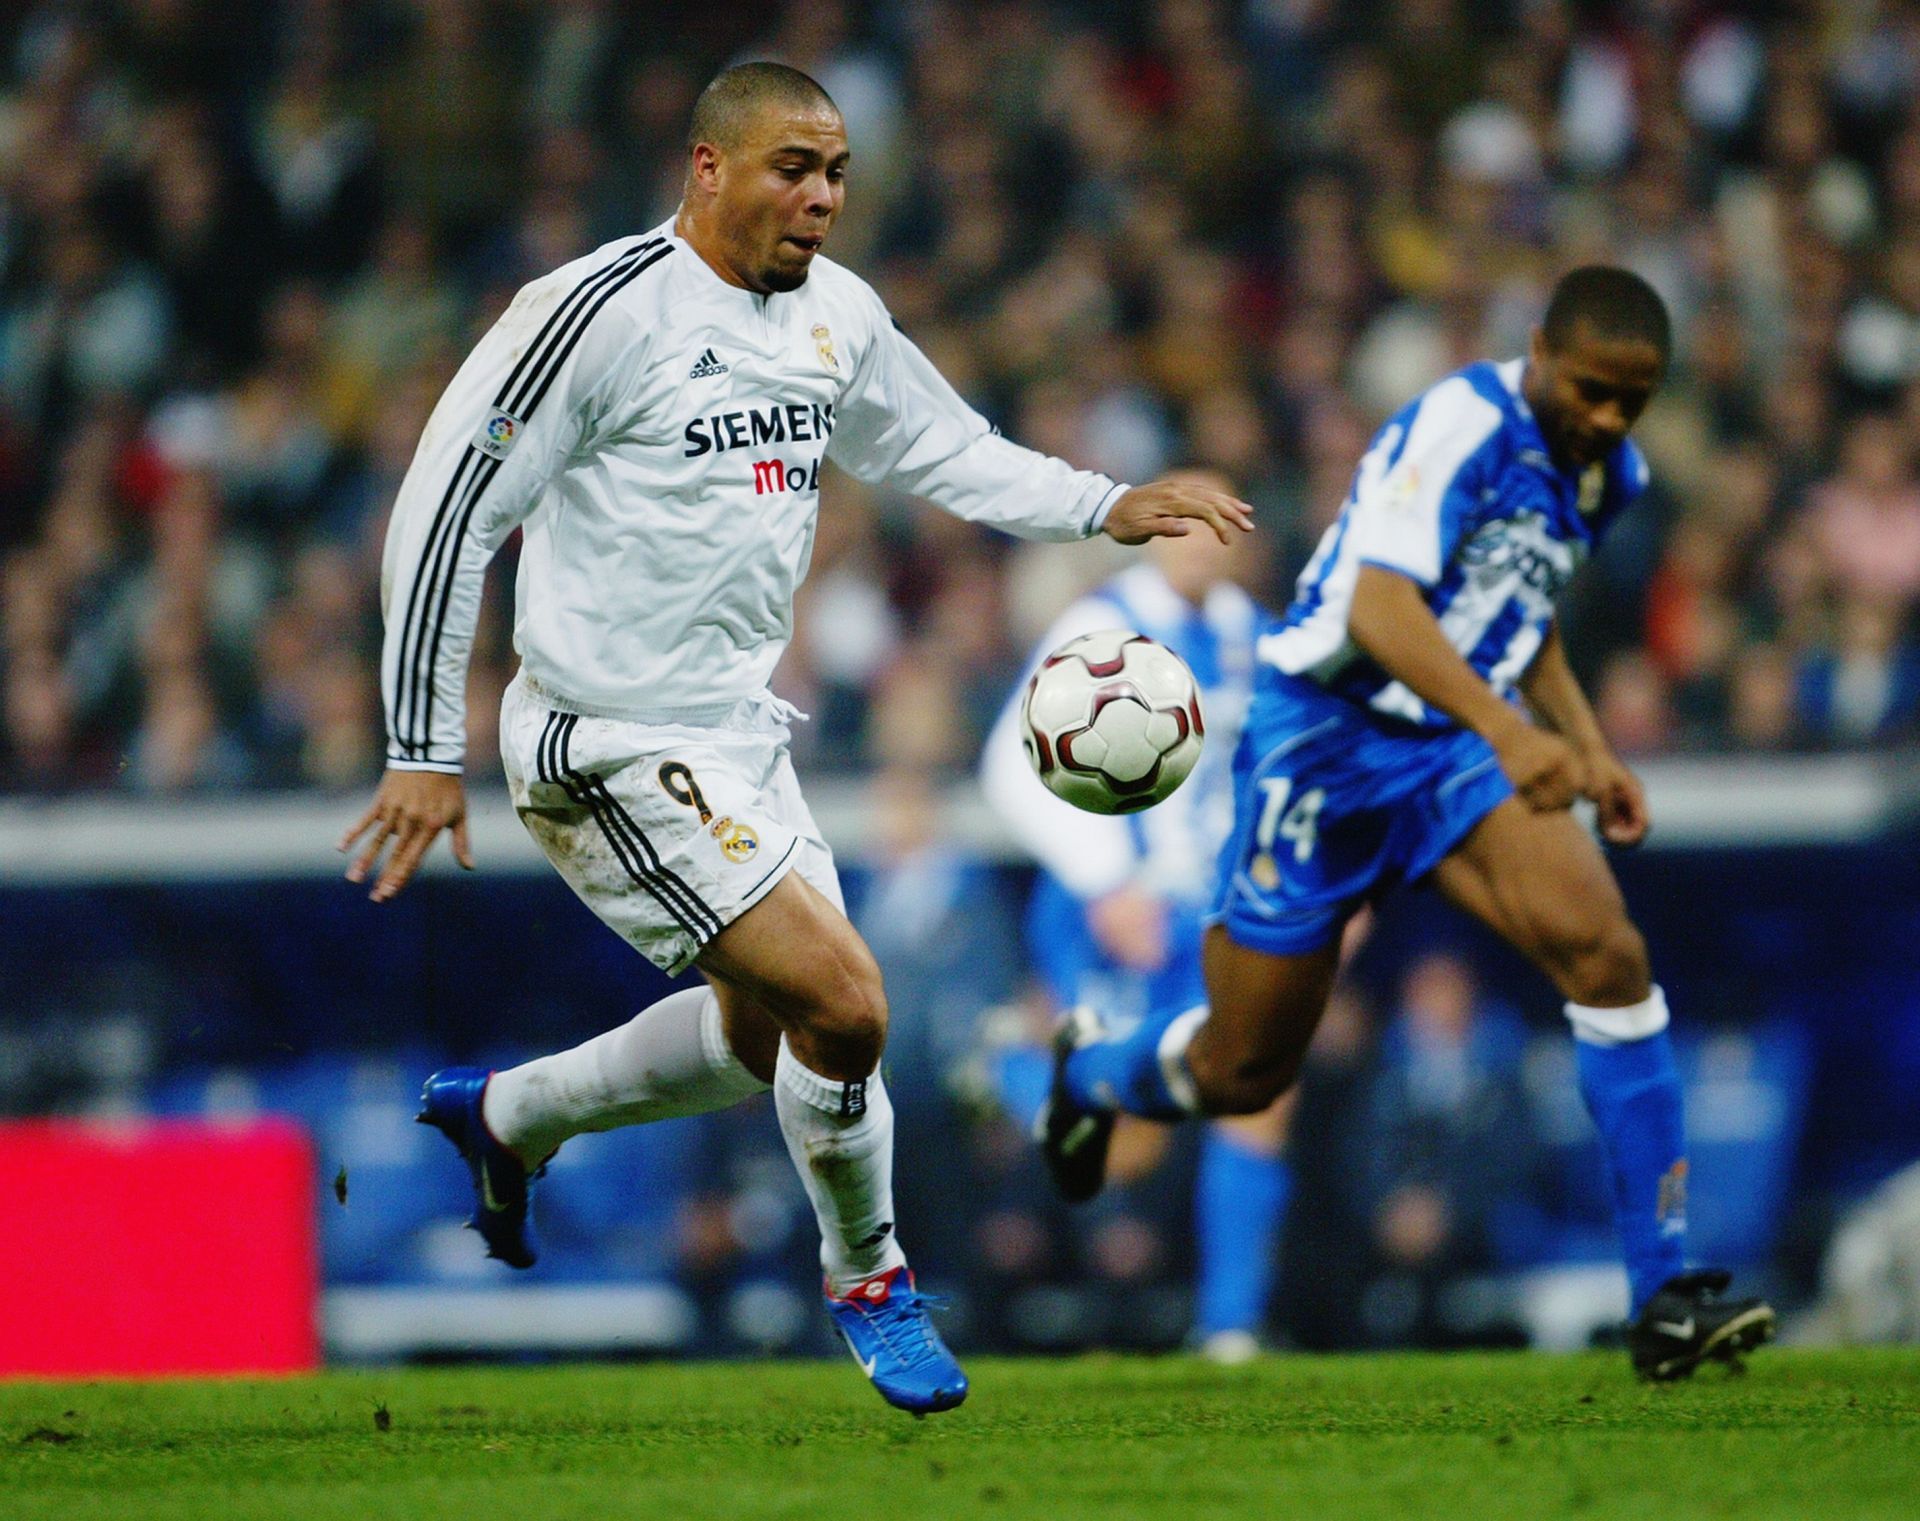 Ronaldo of Real Madrid running with the ball